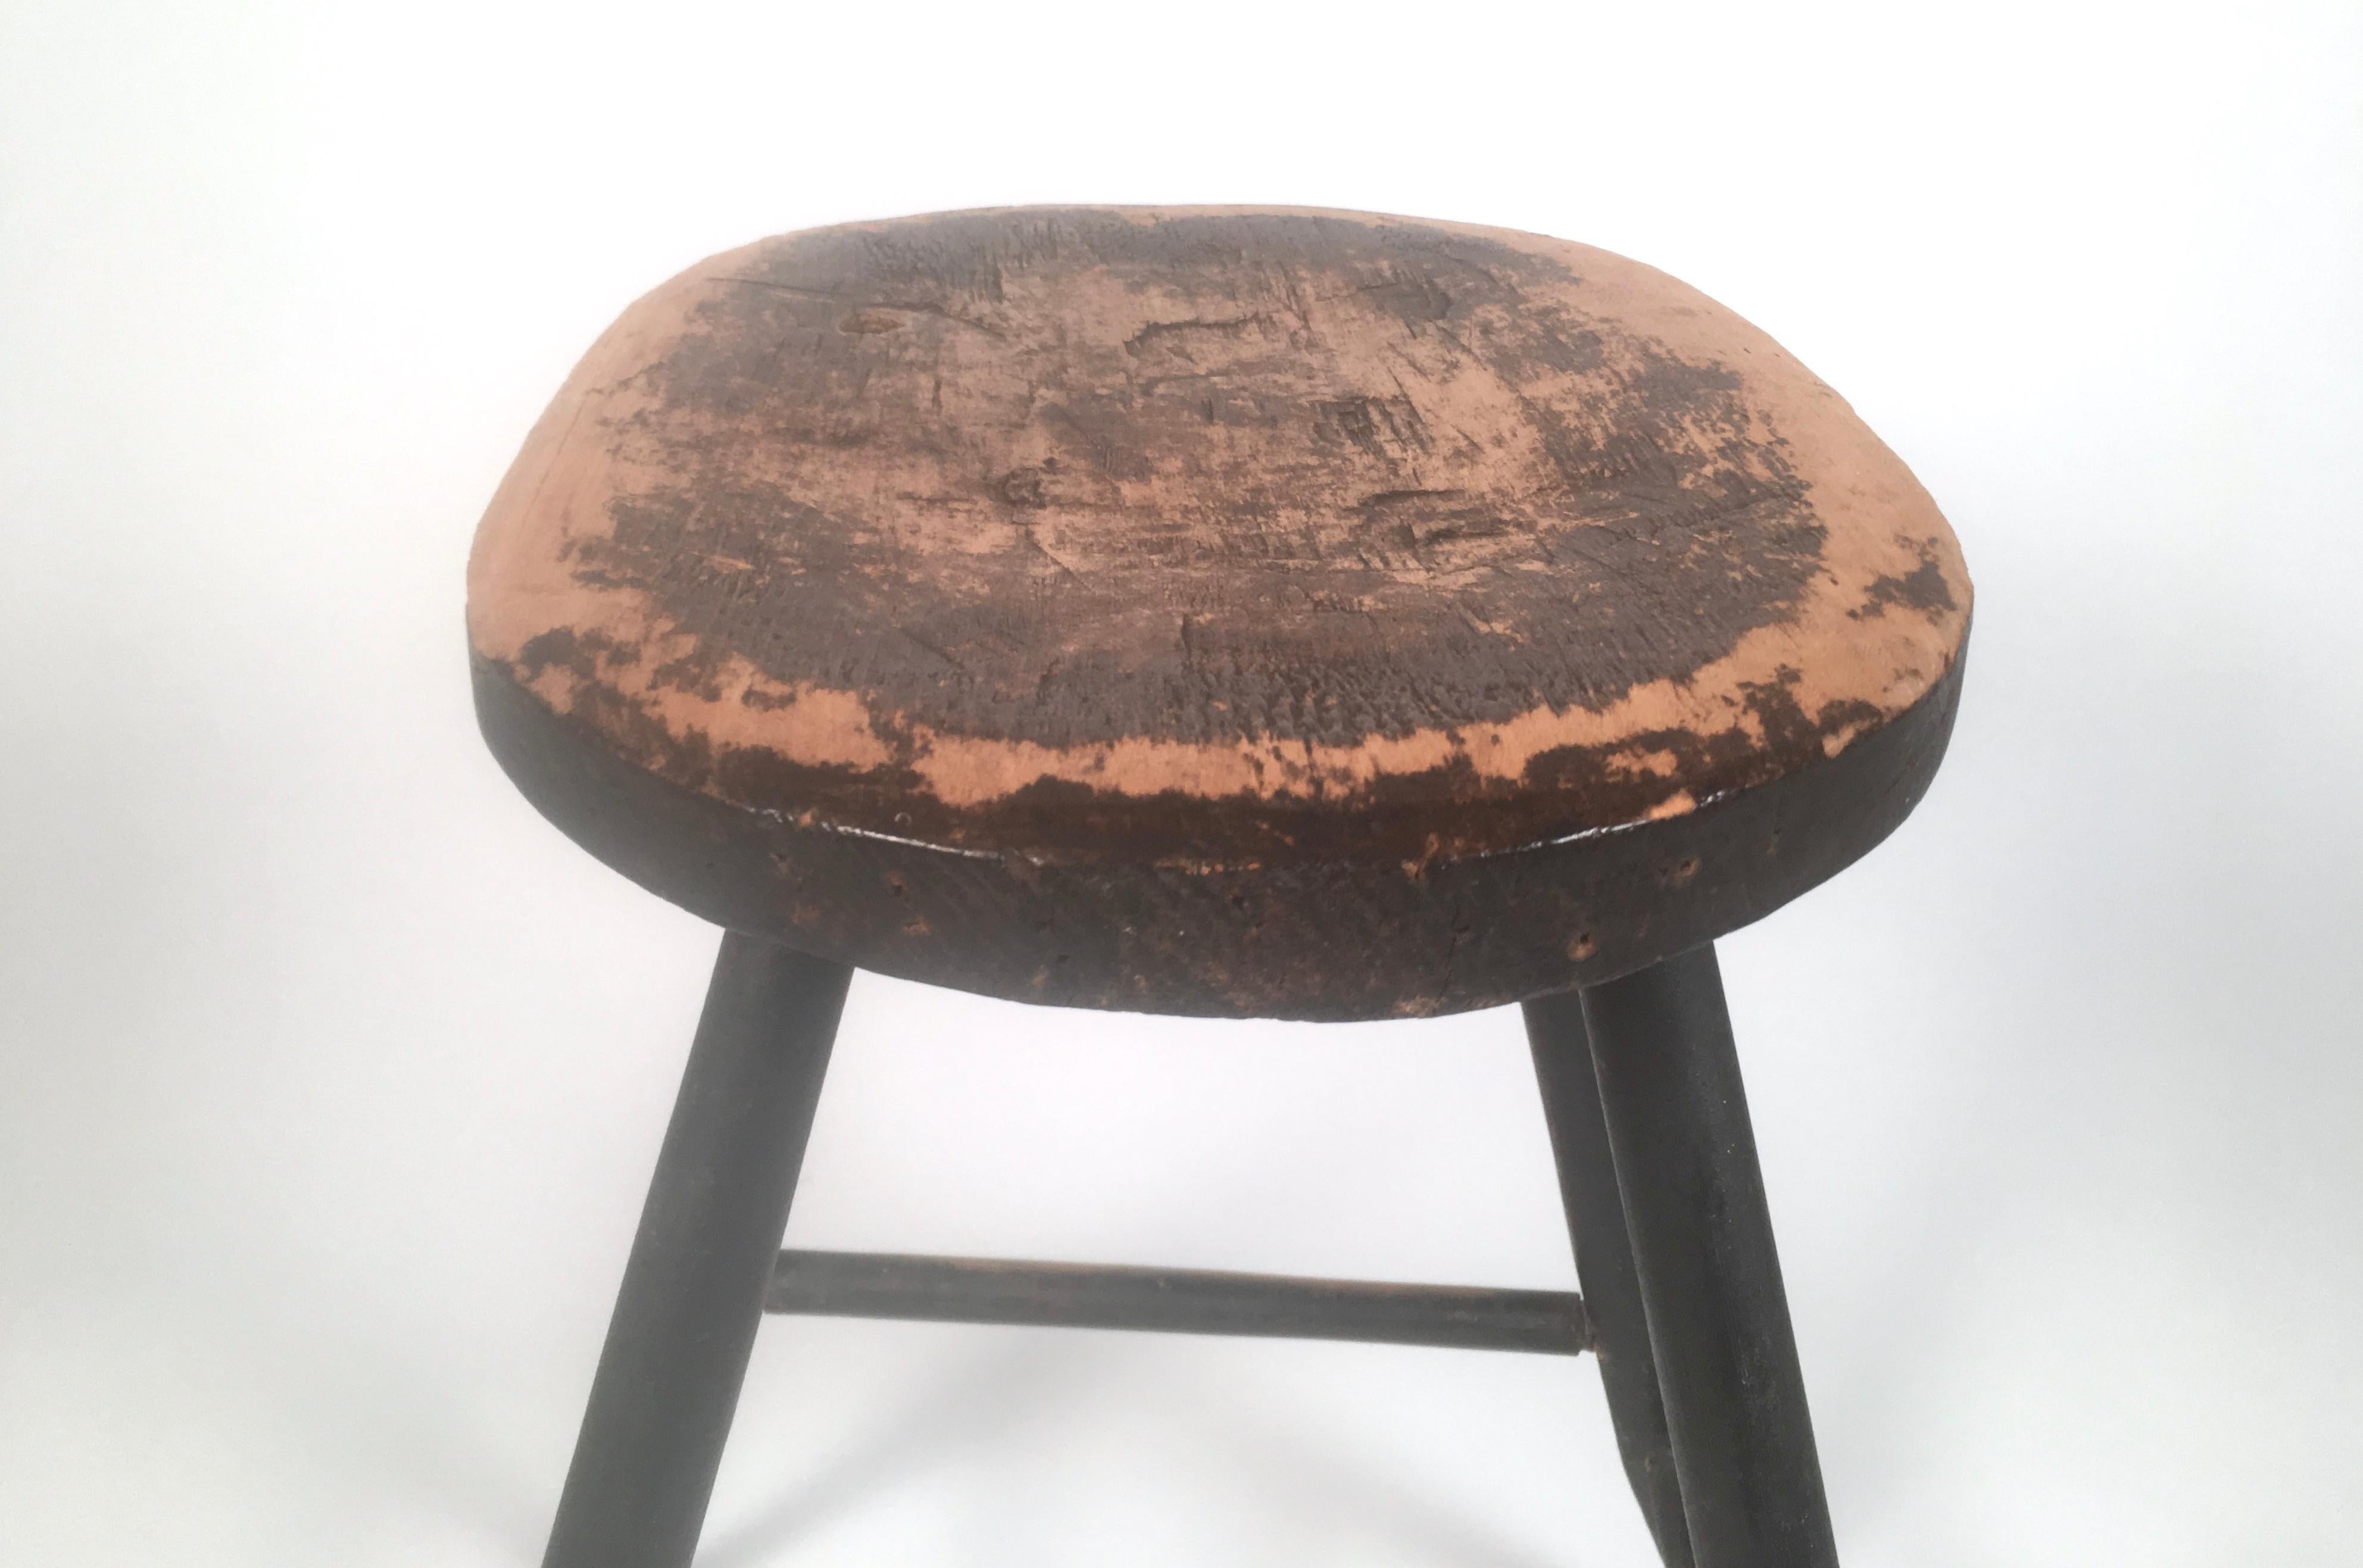 Painted Early American Country Windsor Stool or Occasional Table